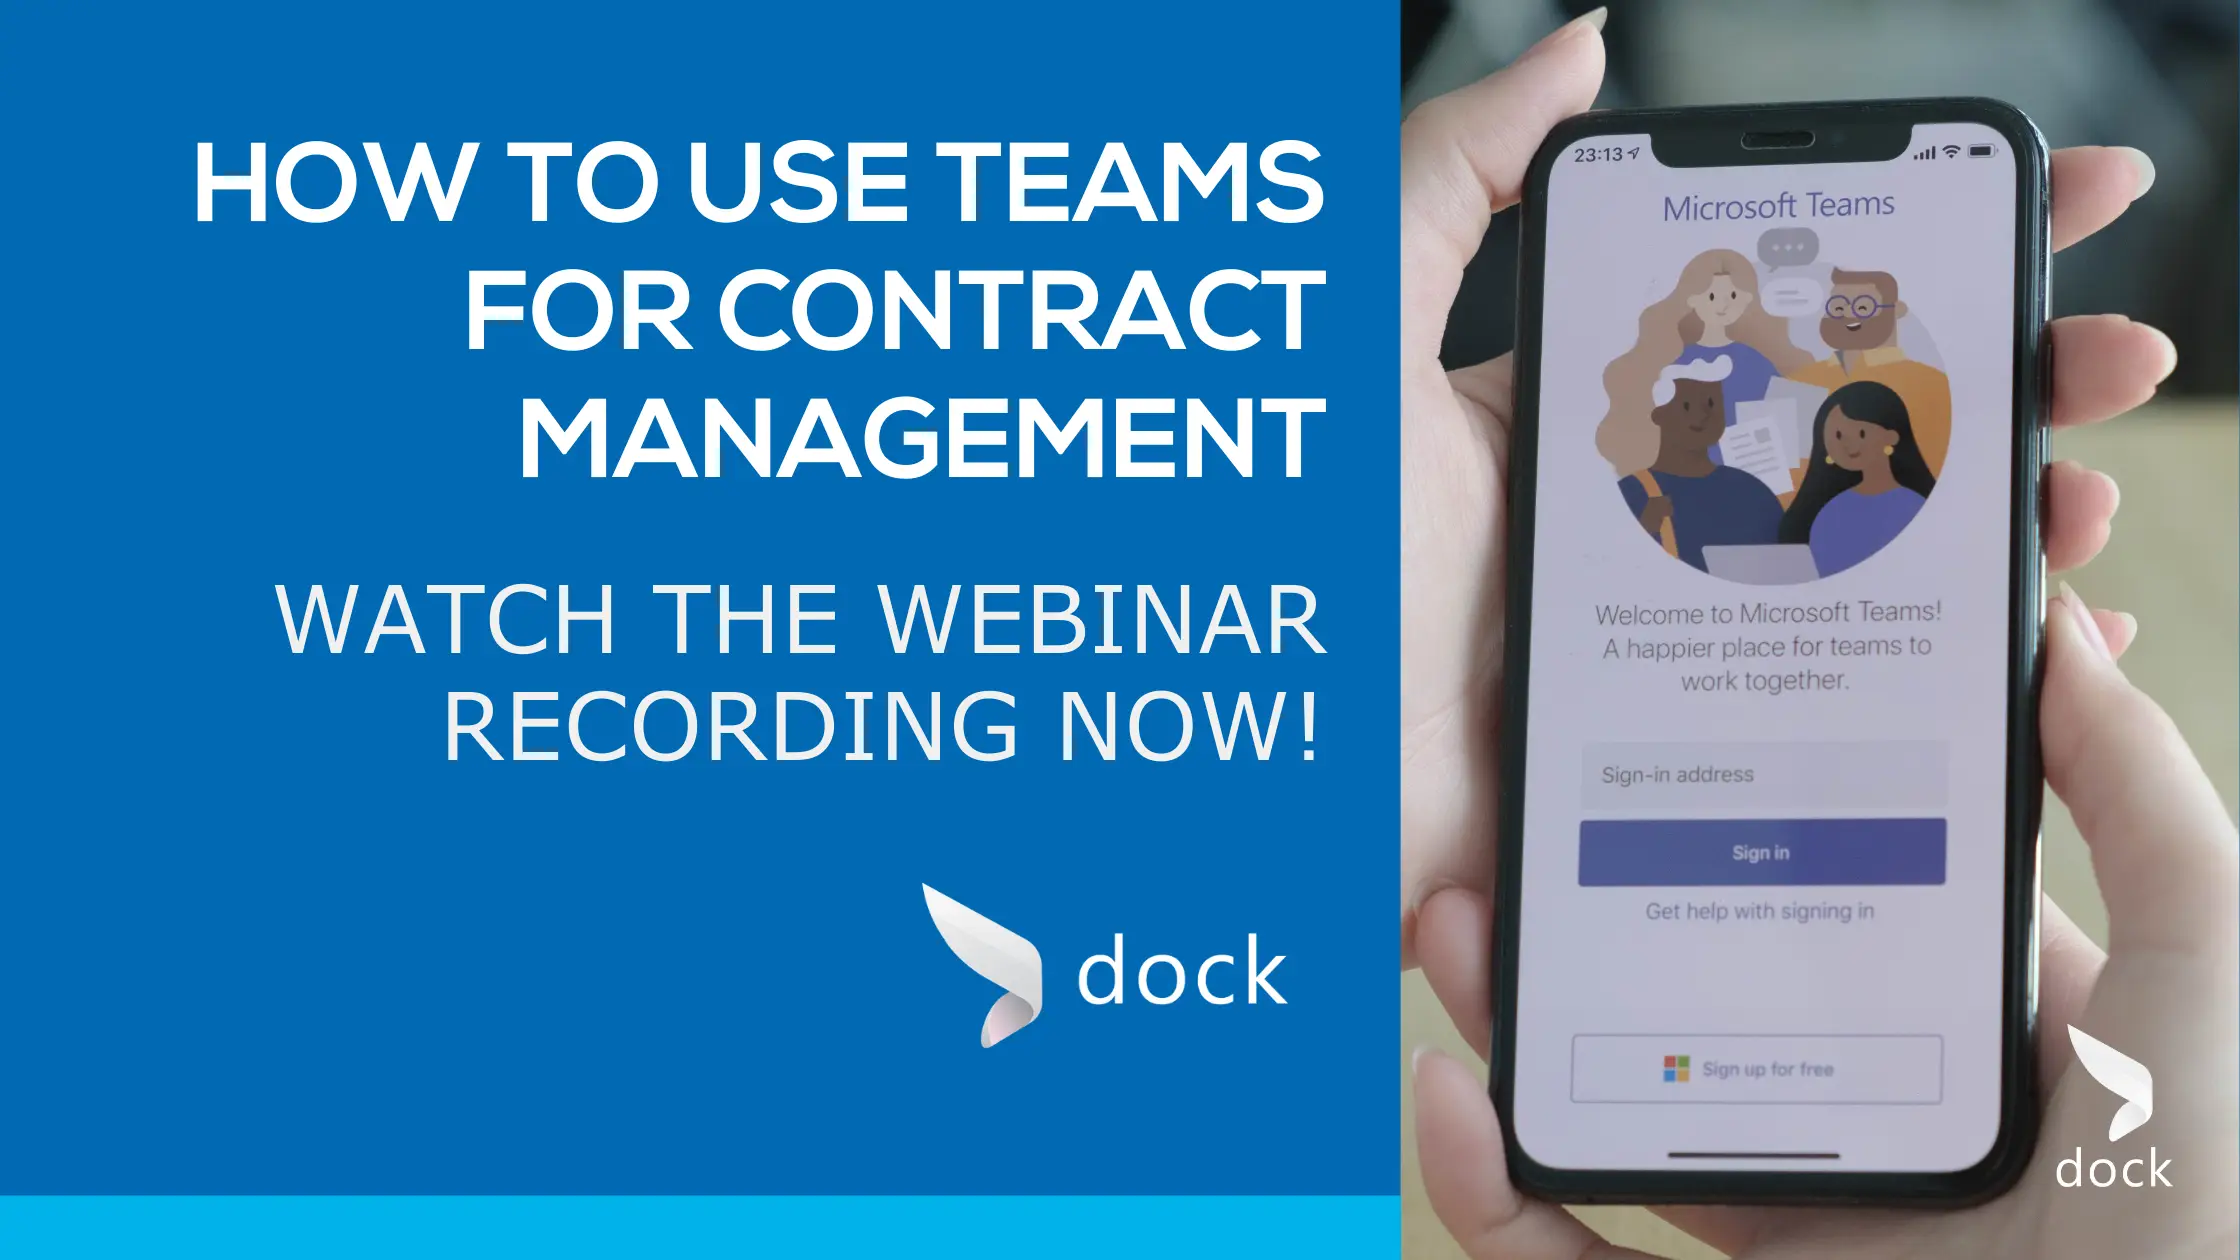 Webinar Recording - How to Use Teams for Contract Management